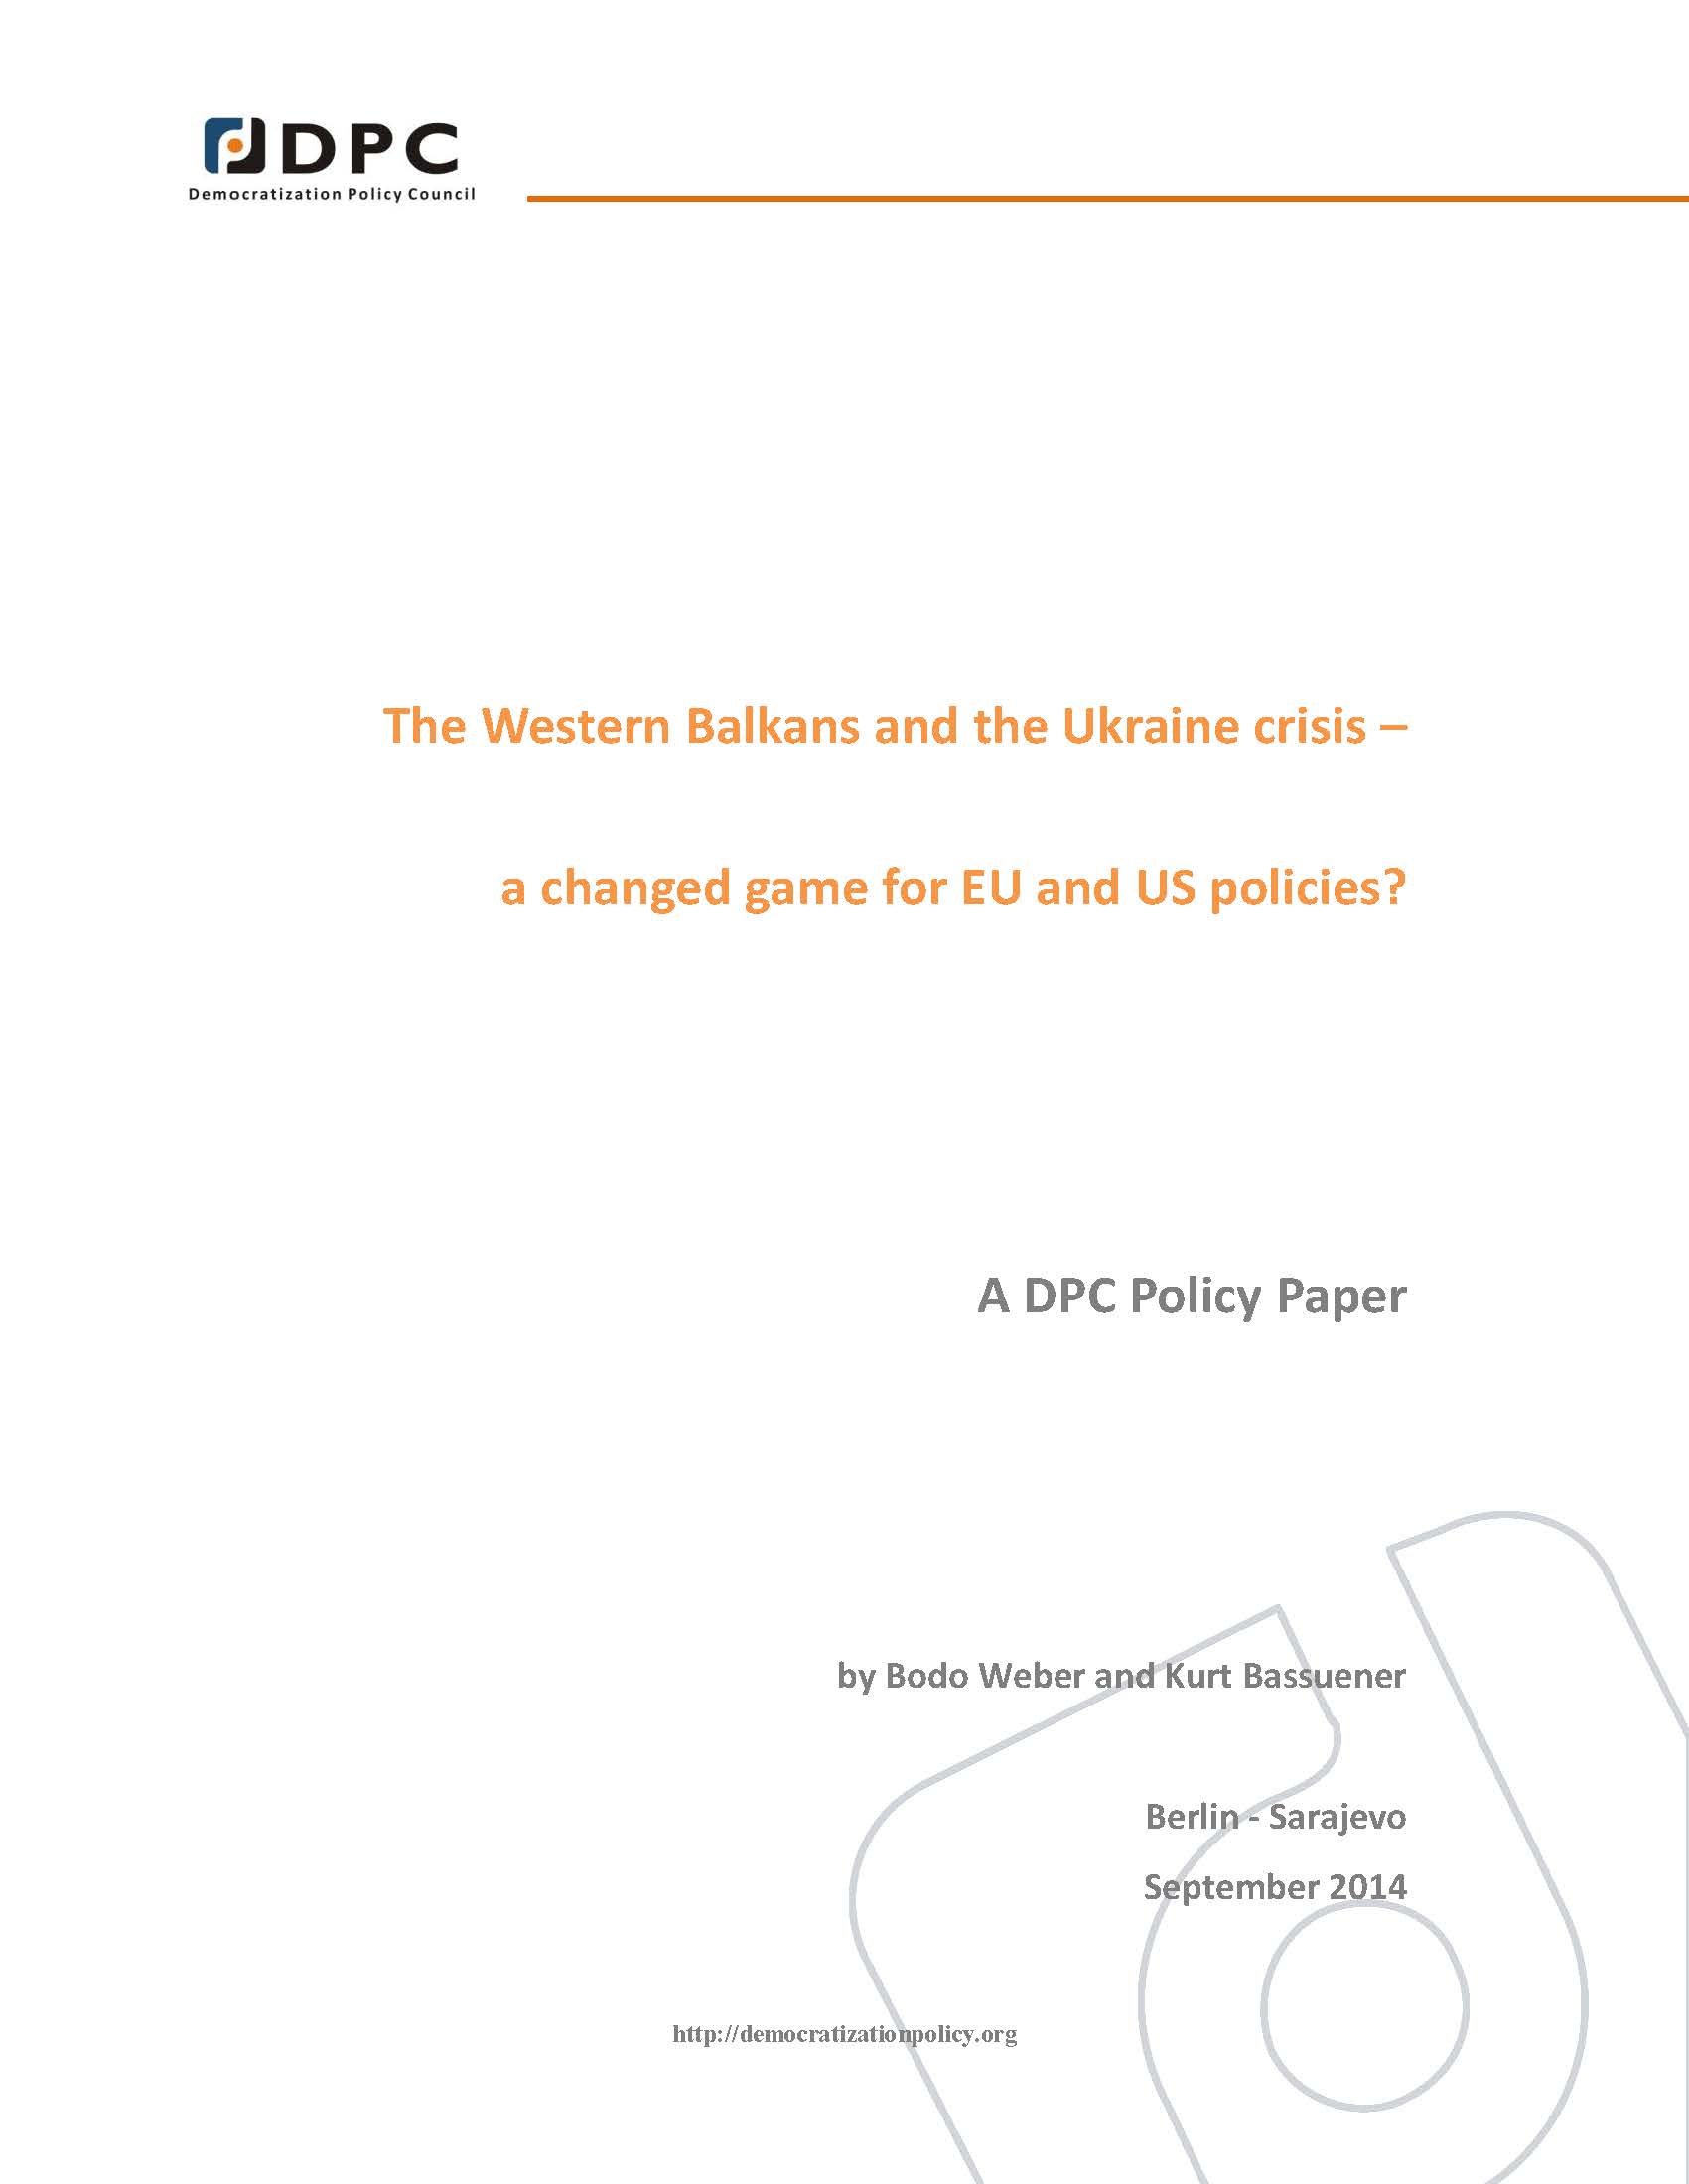 The Western Balkans and the Ukraine crisis – a changed game for EU and US policies?